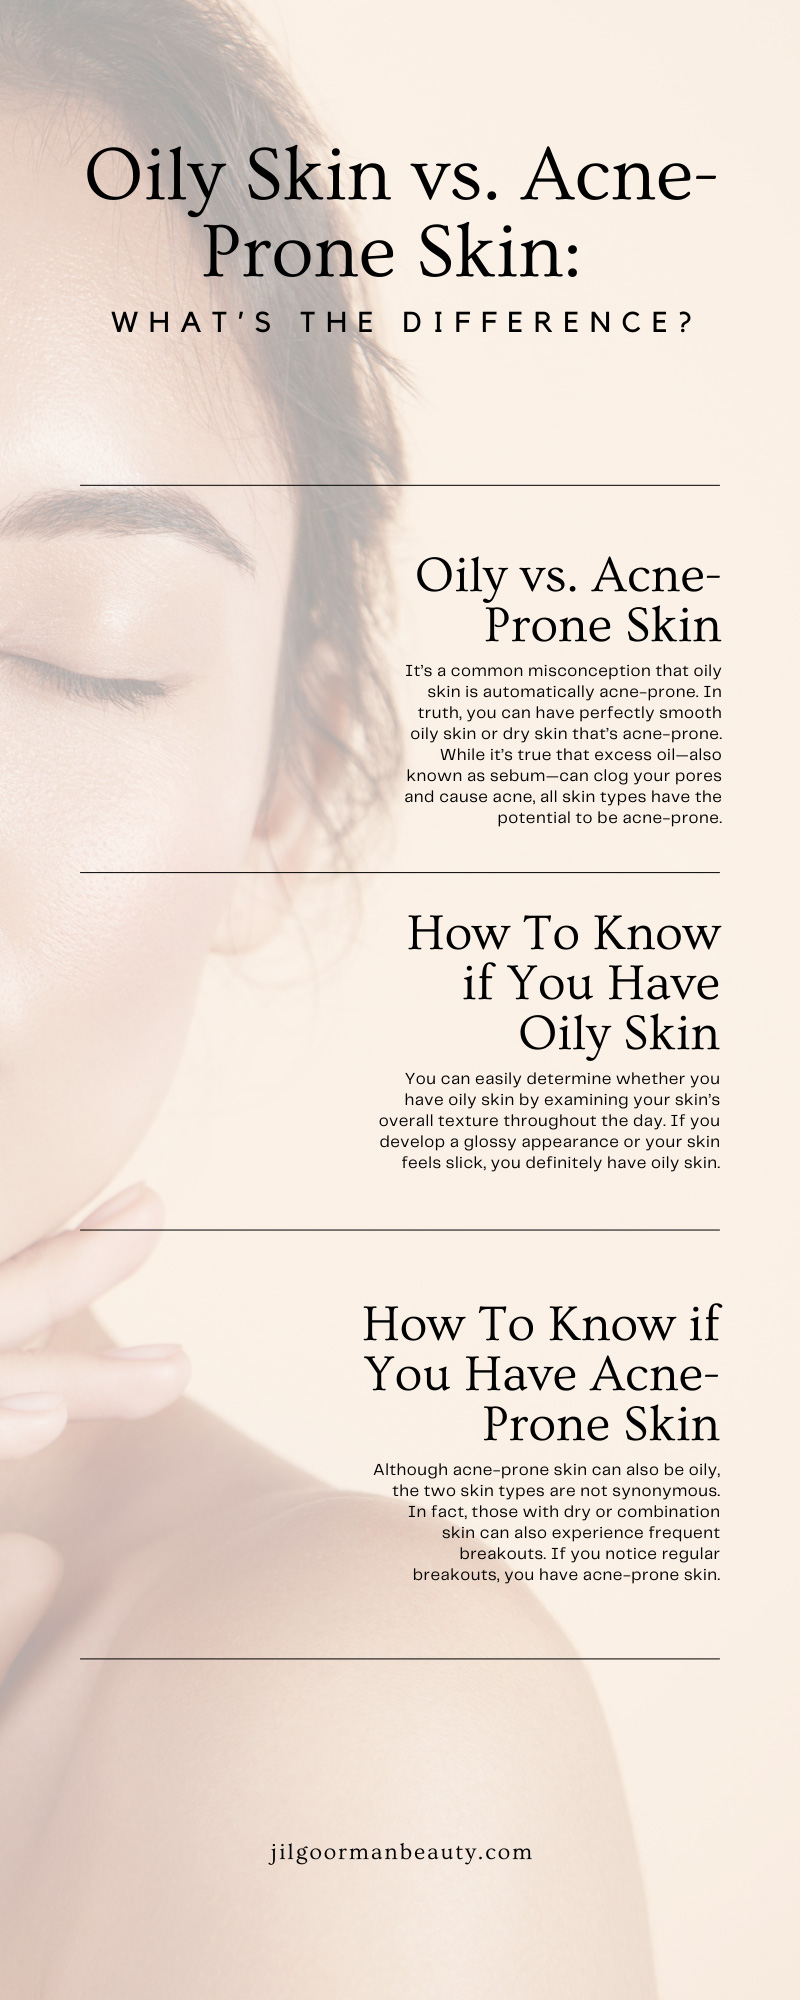 Oily Skin vs. Acne-Prone Skin: What’s the Difference?